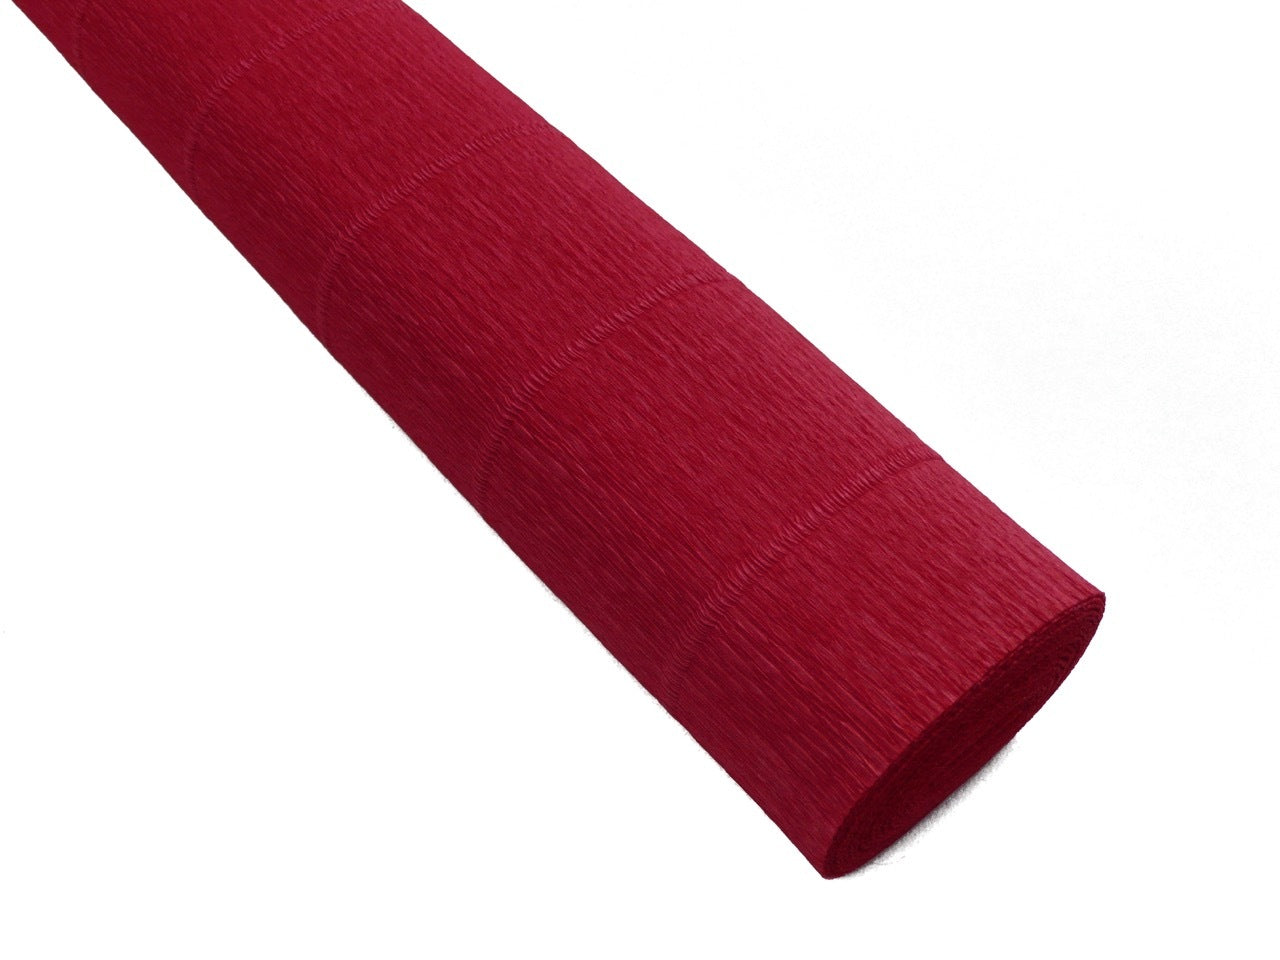 Heavyweight Italian crepe paper is perfect for paper flowers. "Coral" has pink tones.  